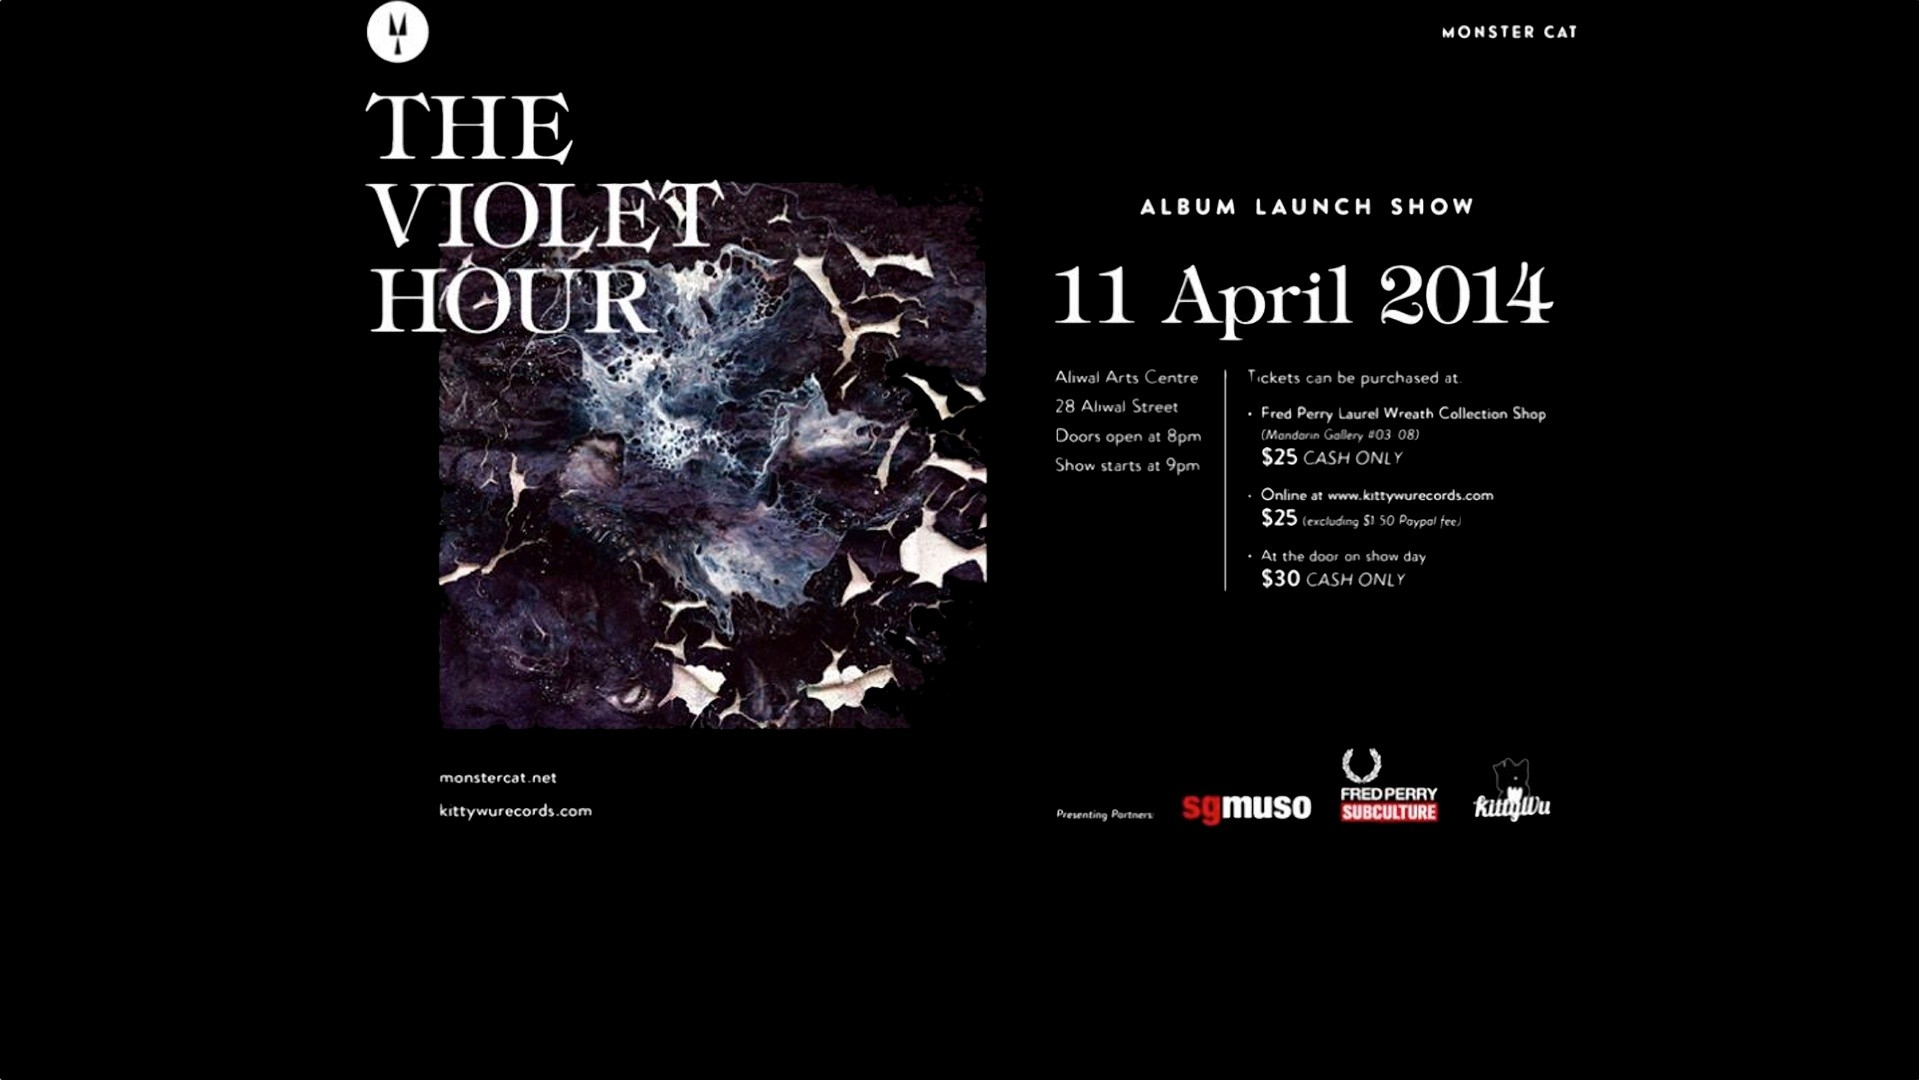 THE VIOLET HOUR Launch Show